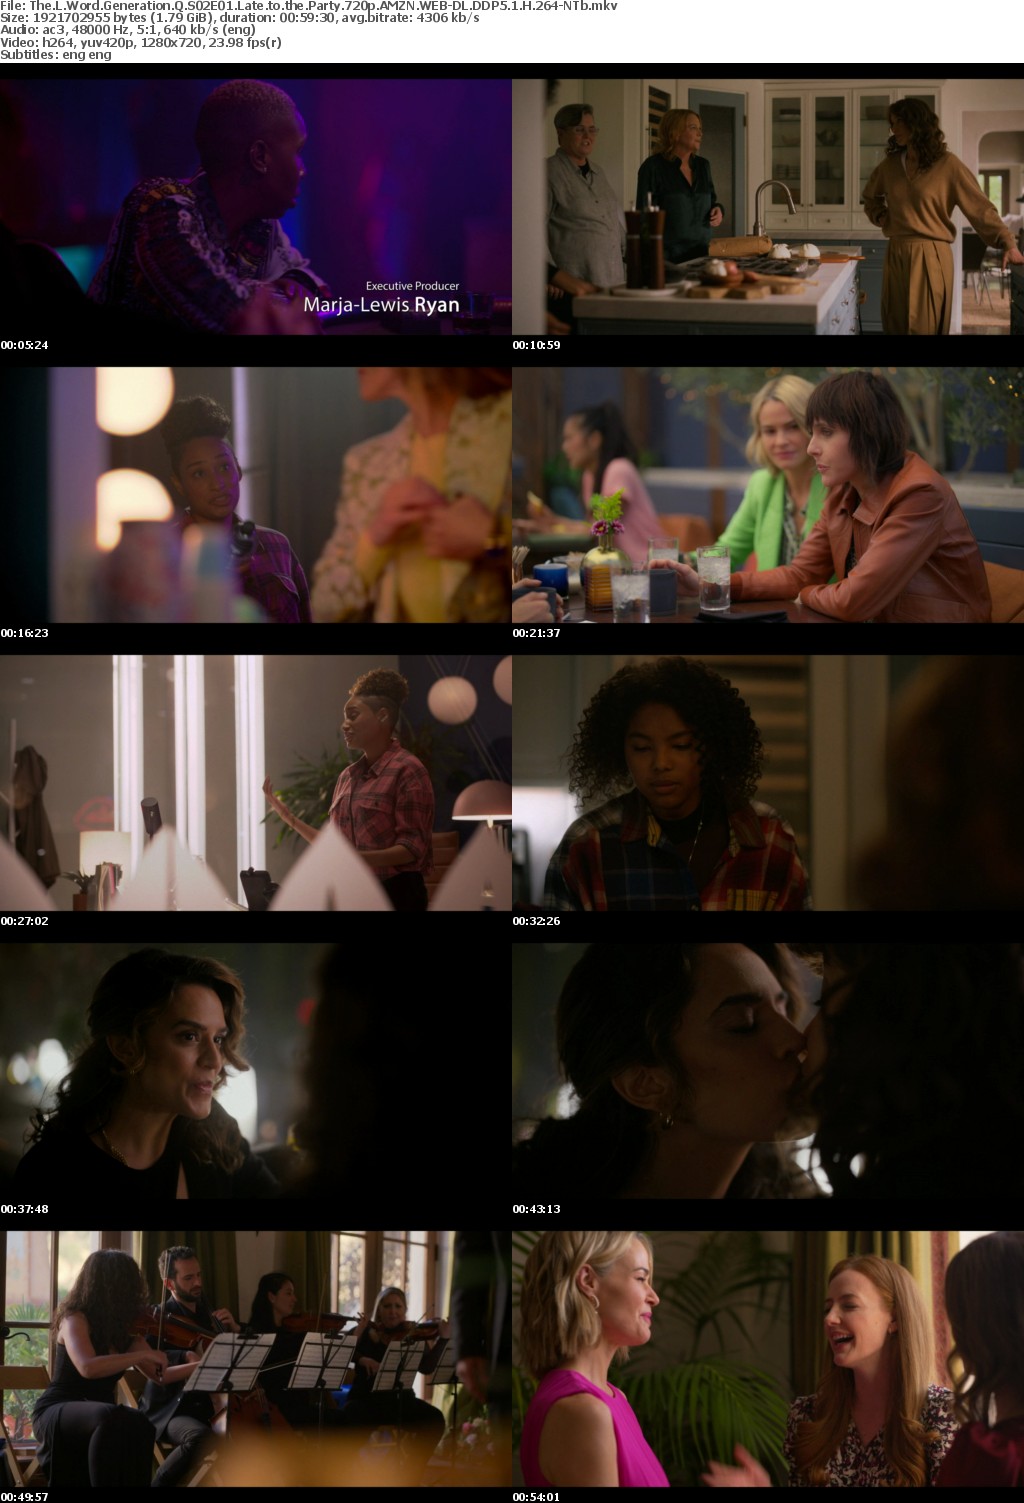 The L Word Generation Q S02E01 Late to the Party 720p AMZN WEBRip DDP5 1 x264-NTb